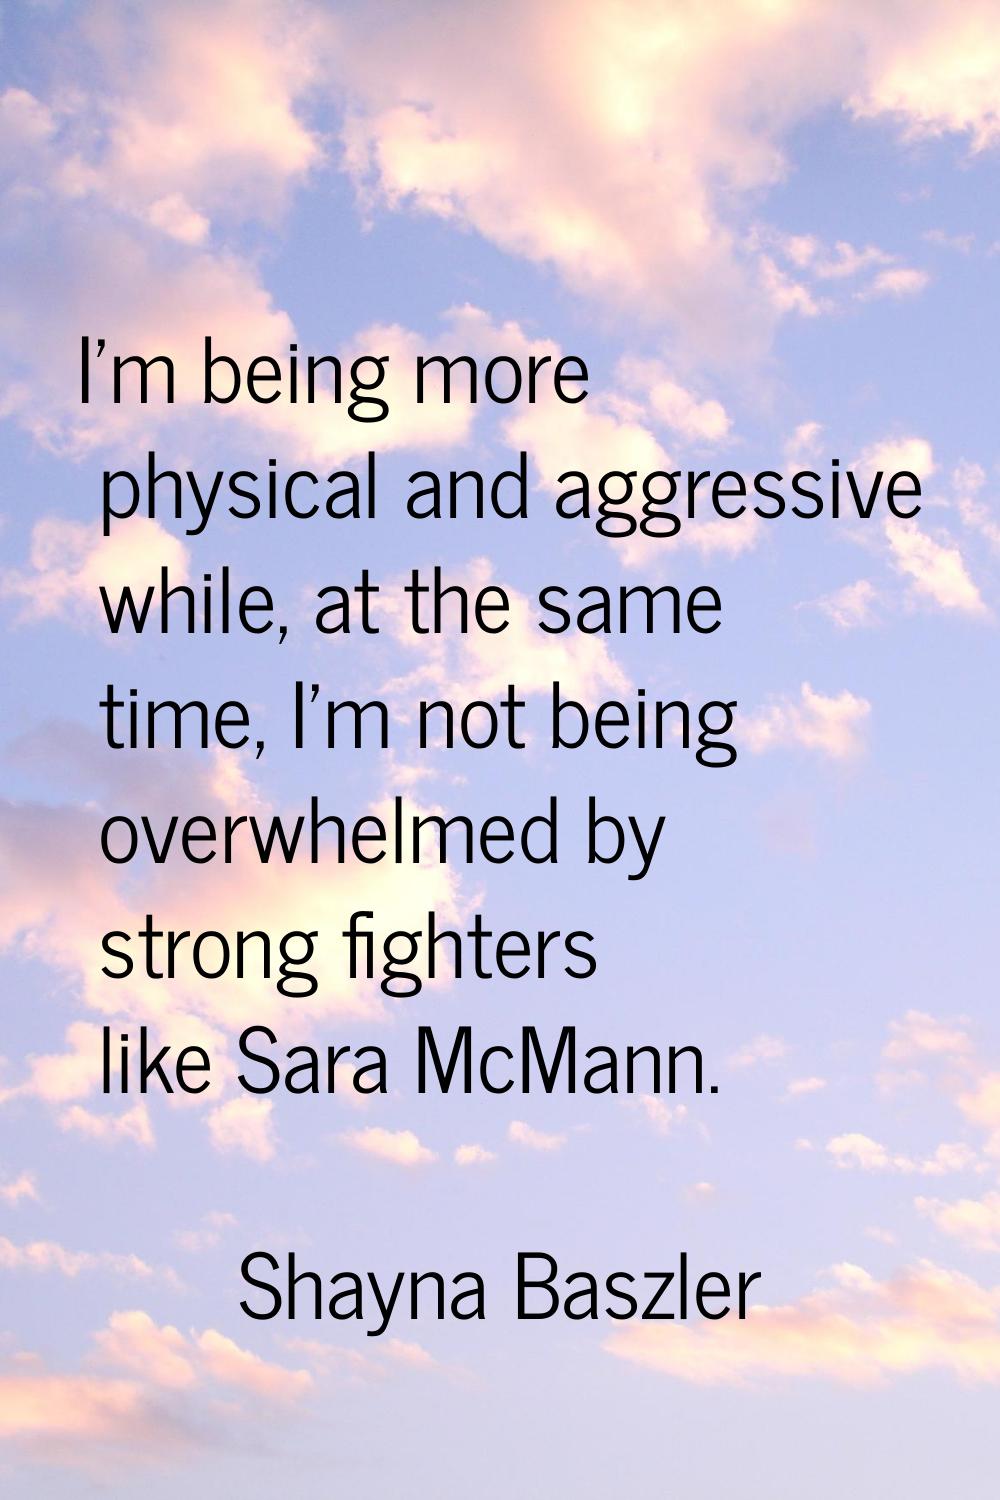 I'm being more physical and aggressive while, at the same time, I'm not being overwhelmed by strong